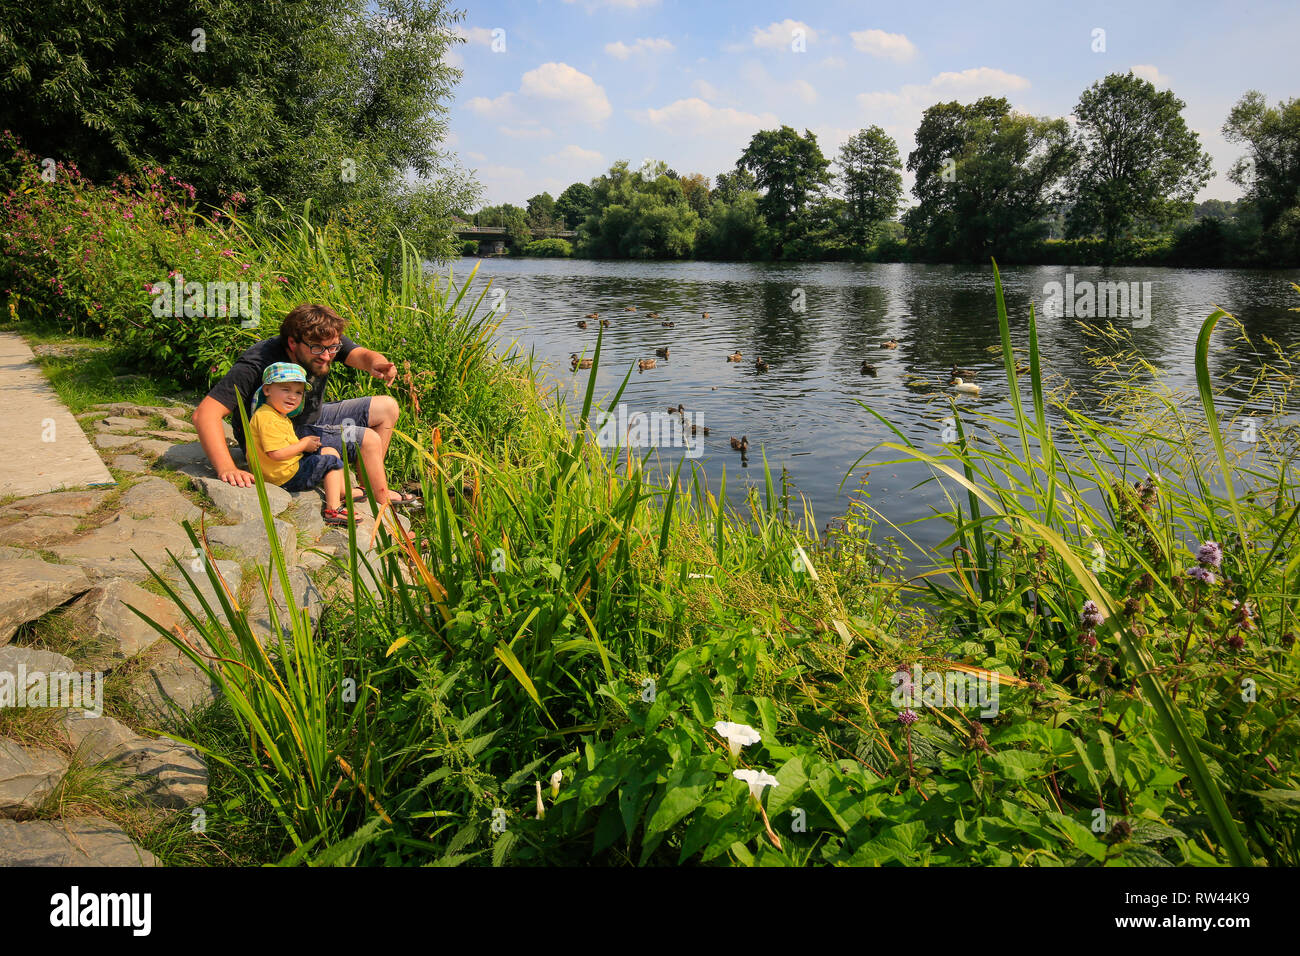 Essen, North Rhine-Westphalia, Ruhr area, Germany, Ruhr promenade in the Steele district, father and son sit on the banks of the Ruhr and feed ducks,  Stock Photo